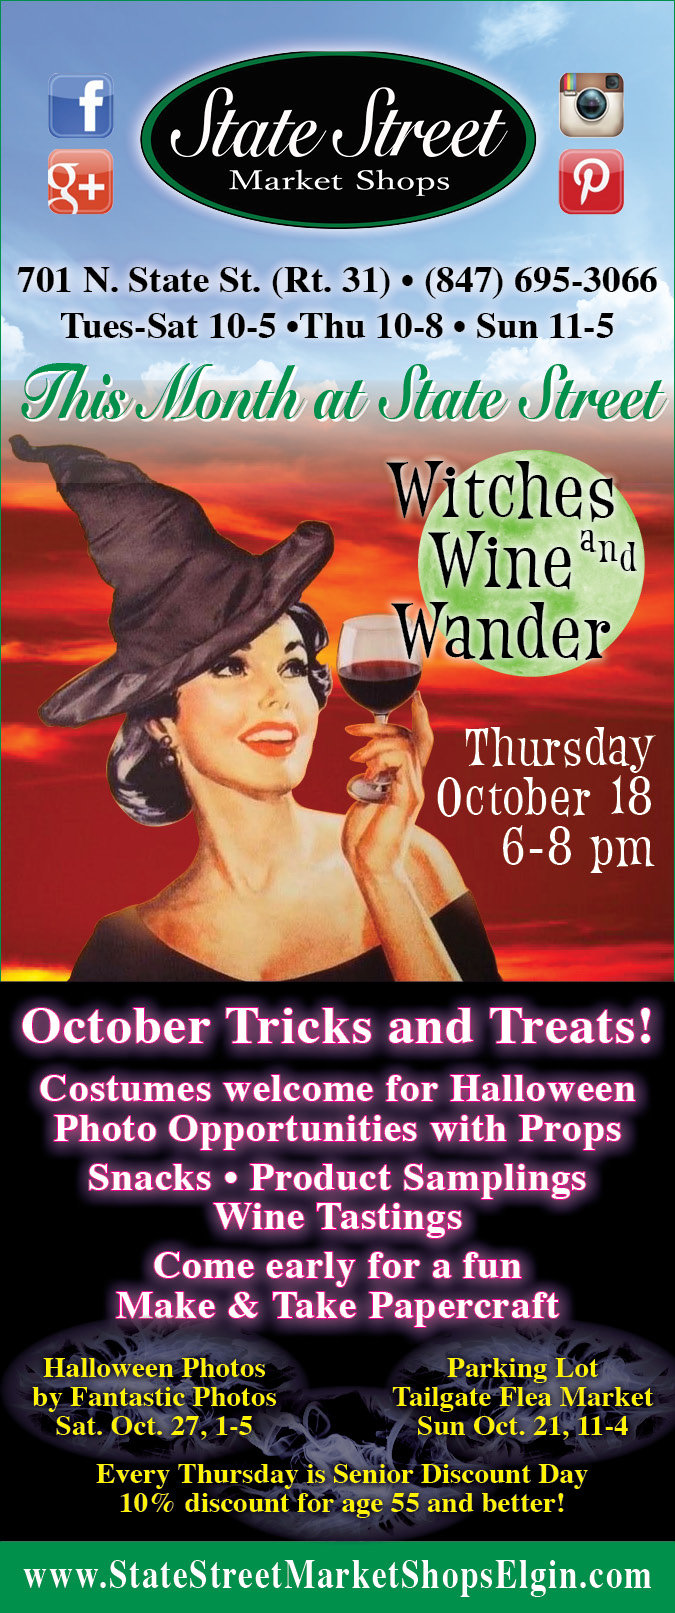 Witches, Wine & Wander at State Street Market Shops